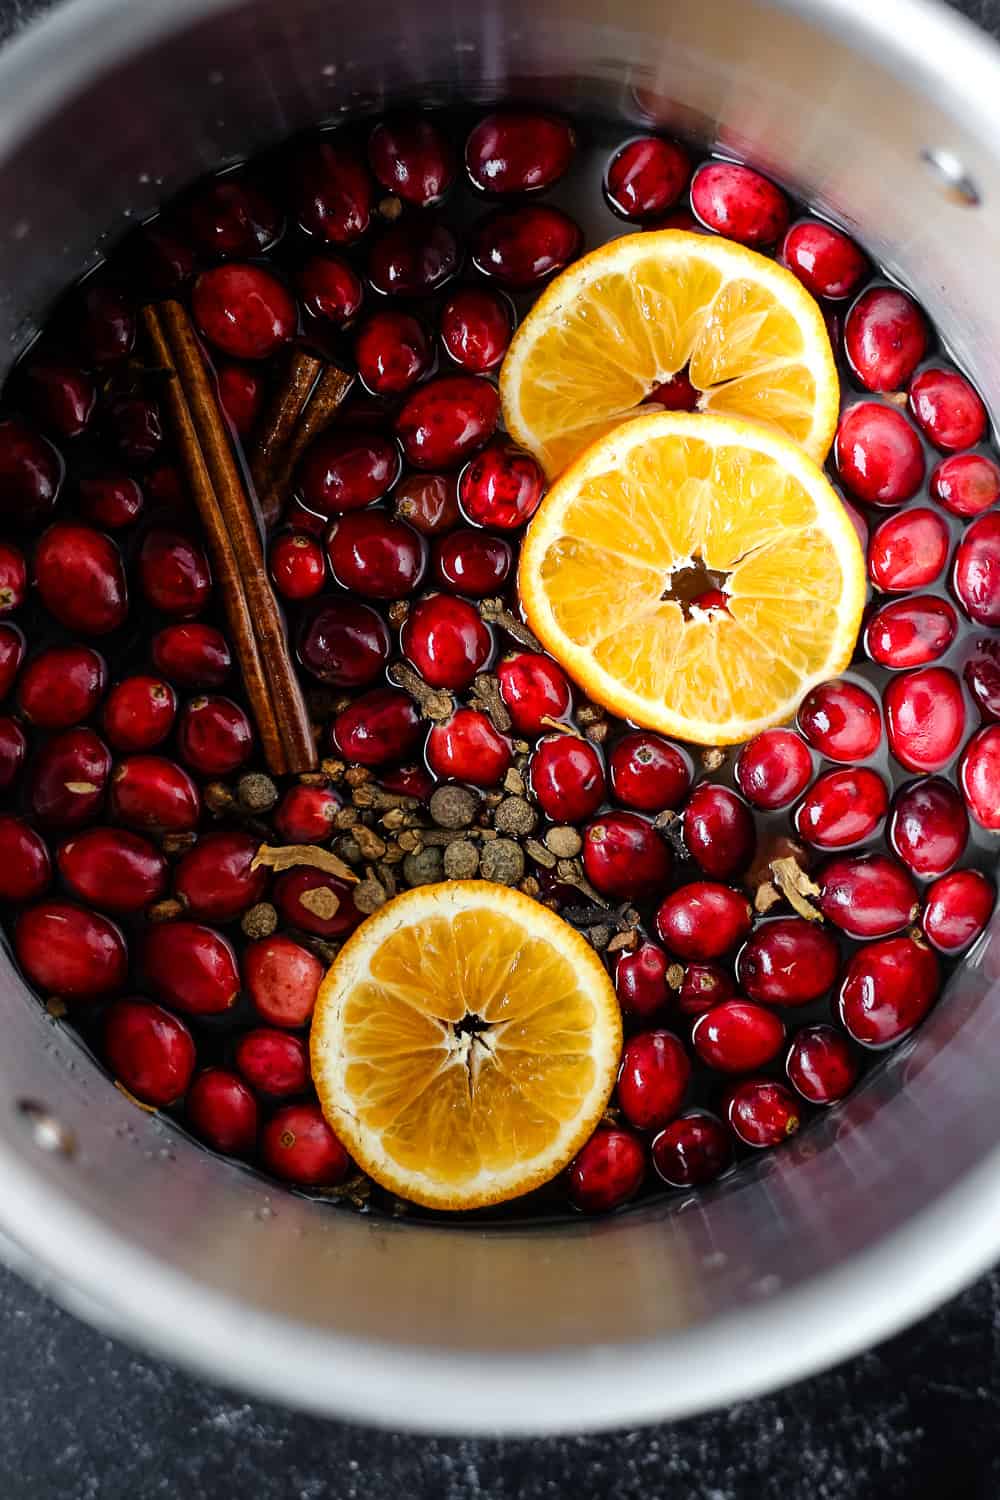 An overhead view of fresh cranberries, cinnamon sticks, and orange slices in a stainless steel cooking pot